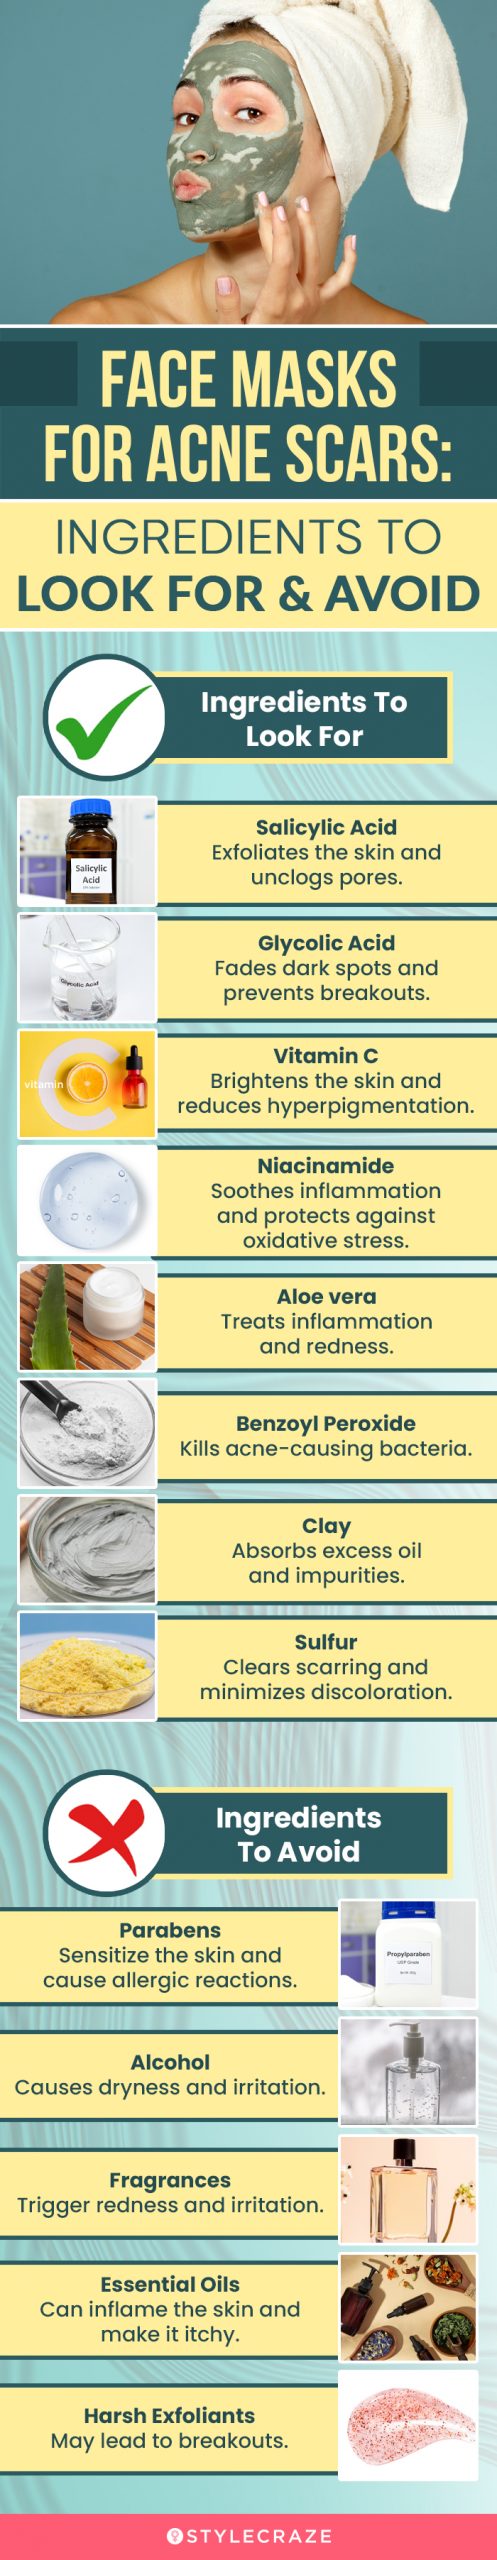 Face Masks For Acne Scars: Ingredients To Look For & Avoid (infographic)